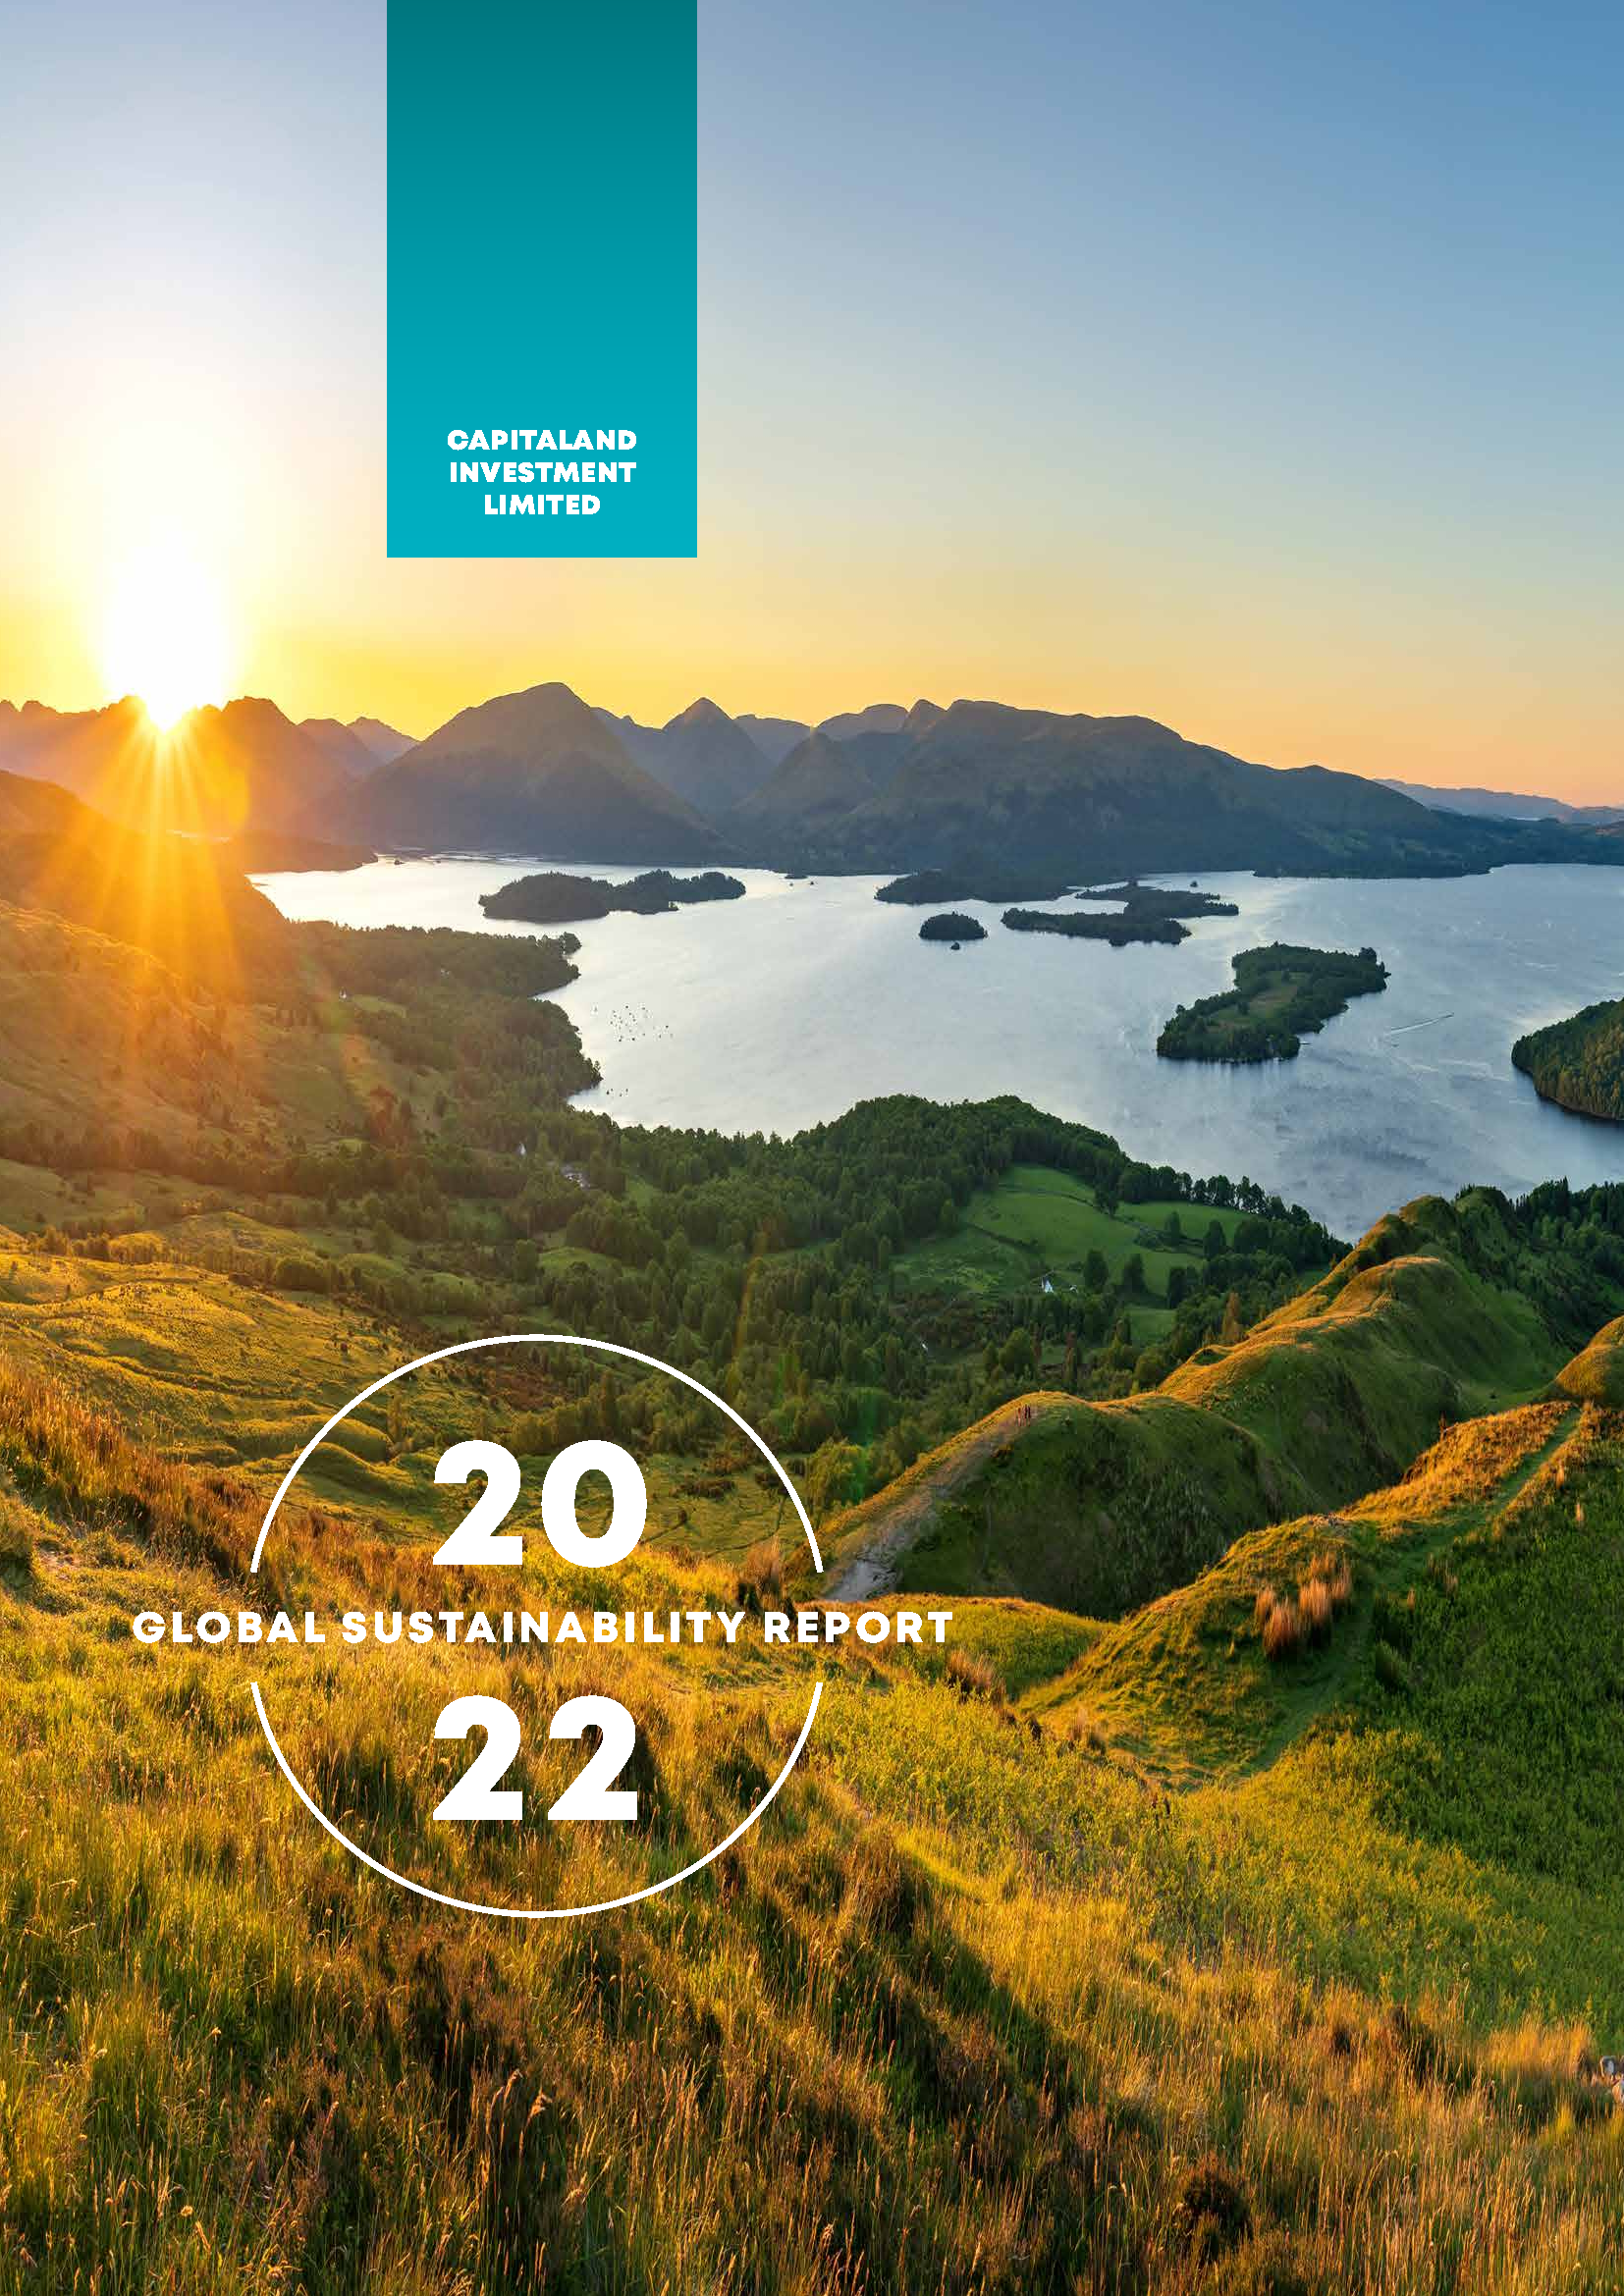 CapitaLand Investment Global Sustainability Report 2022 - GRI Standards